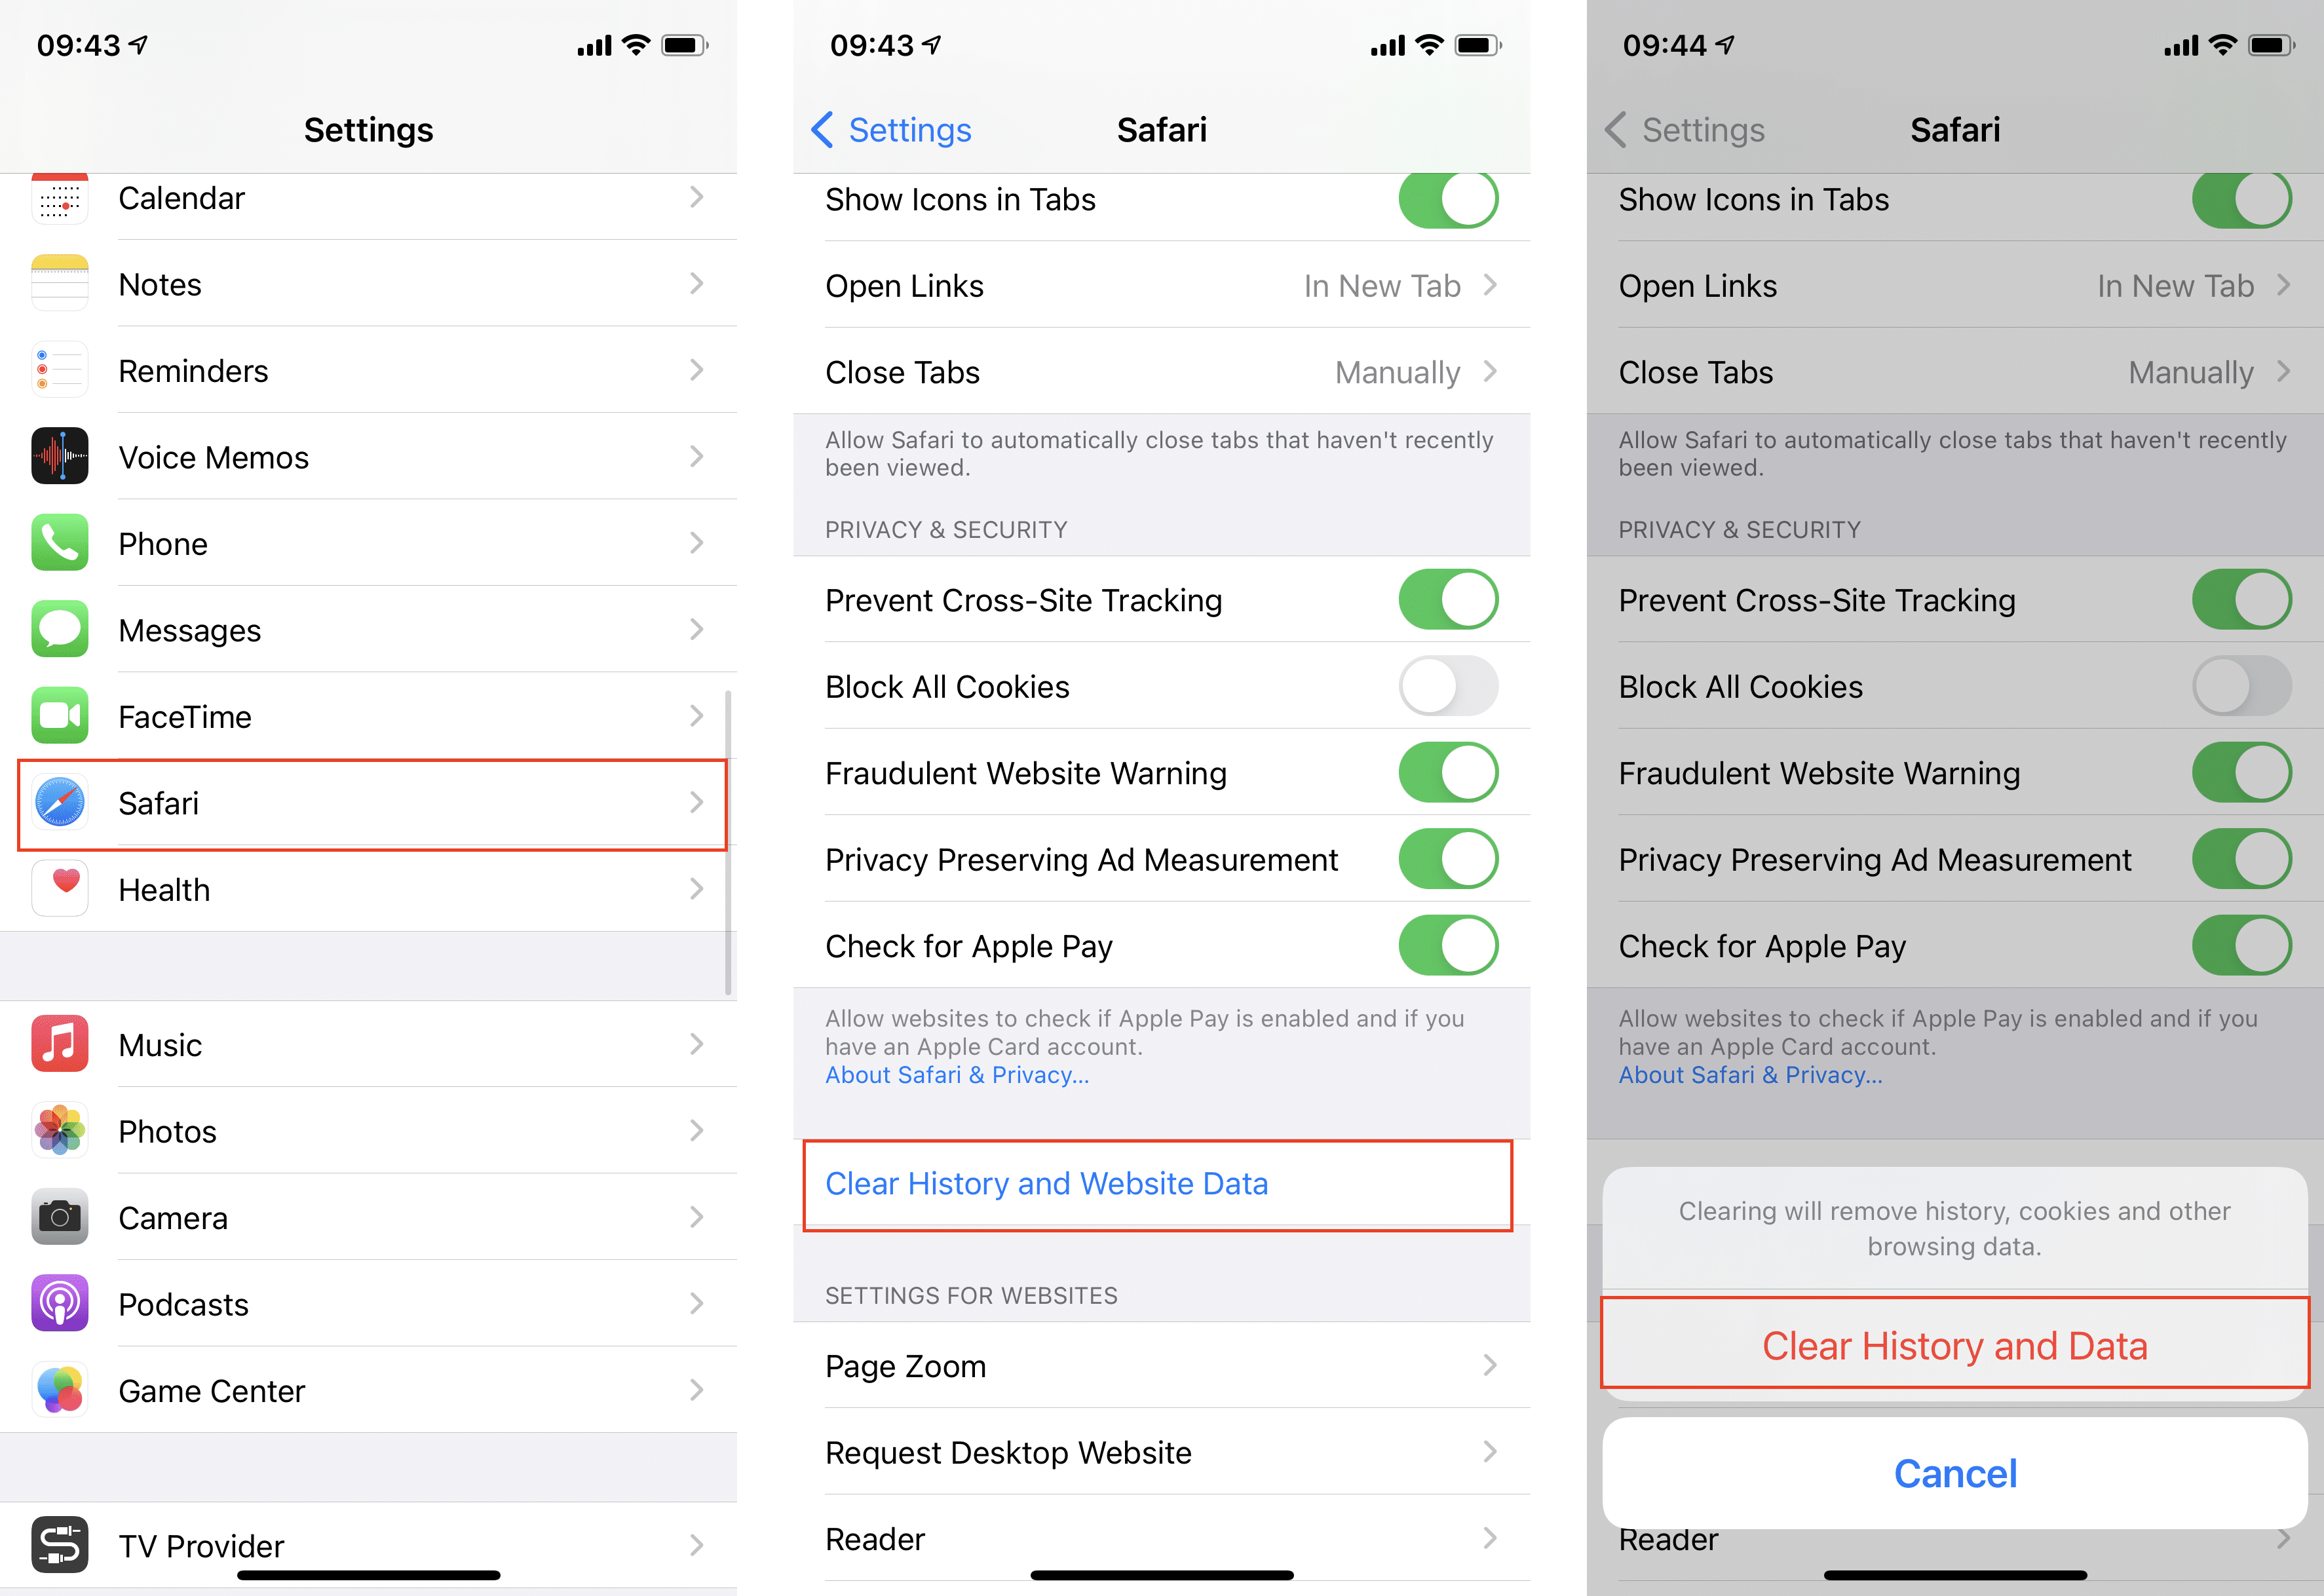 iPhone showing Podcasts settings